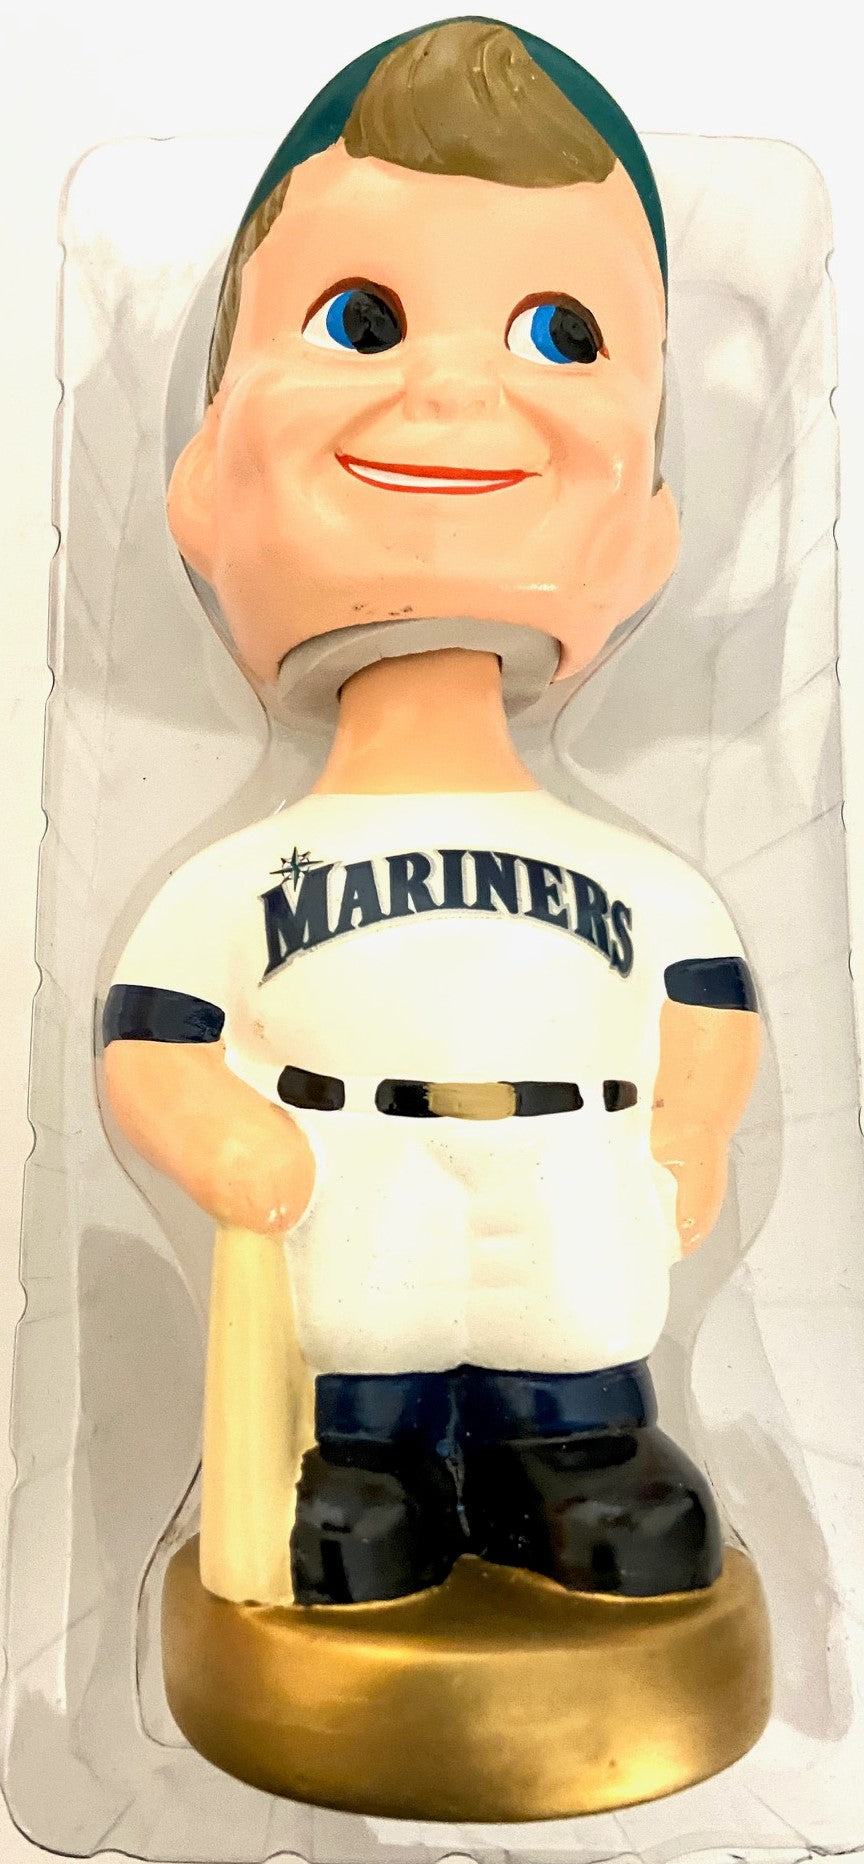 Seattle Mariners 2002 MLB "Boy" Bobblehead (New w/blemishes) by Twins Enterprise